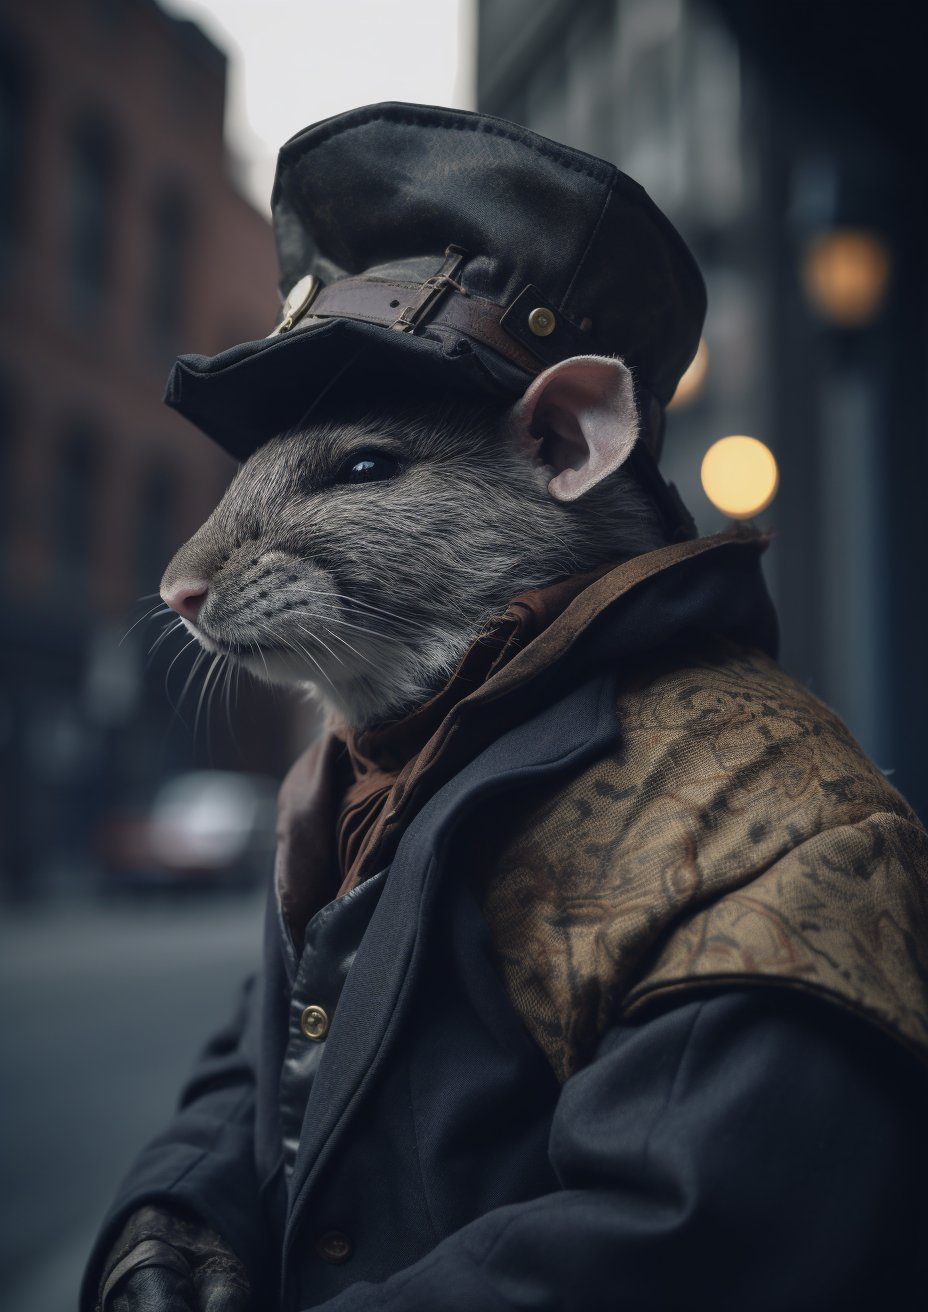 anthropomorphic rat czar, in the style of gangs of new York, cold luts filter, professional cosplay photoshoot Side-Angle (Side-View): Panasonic...